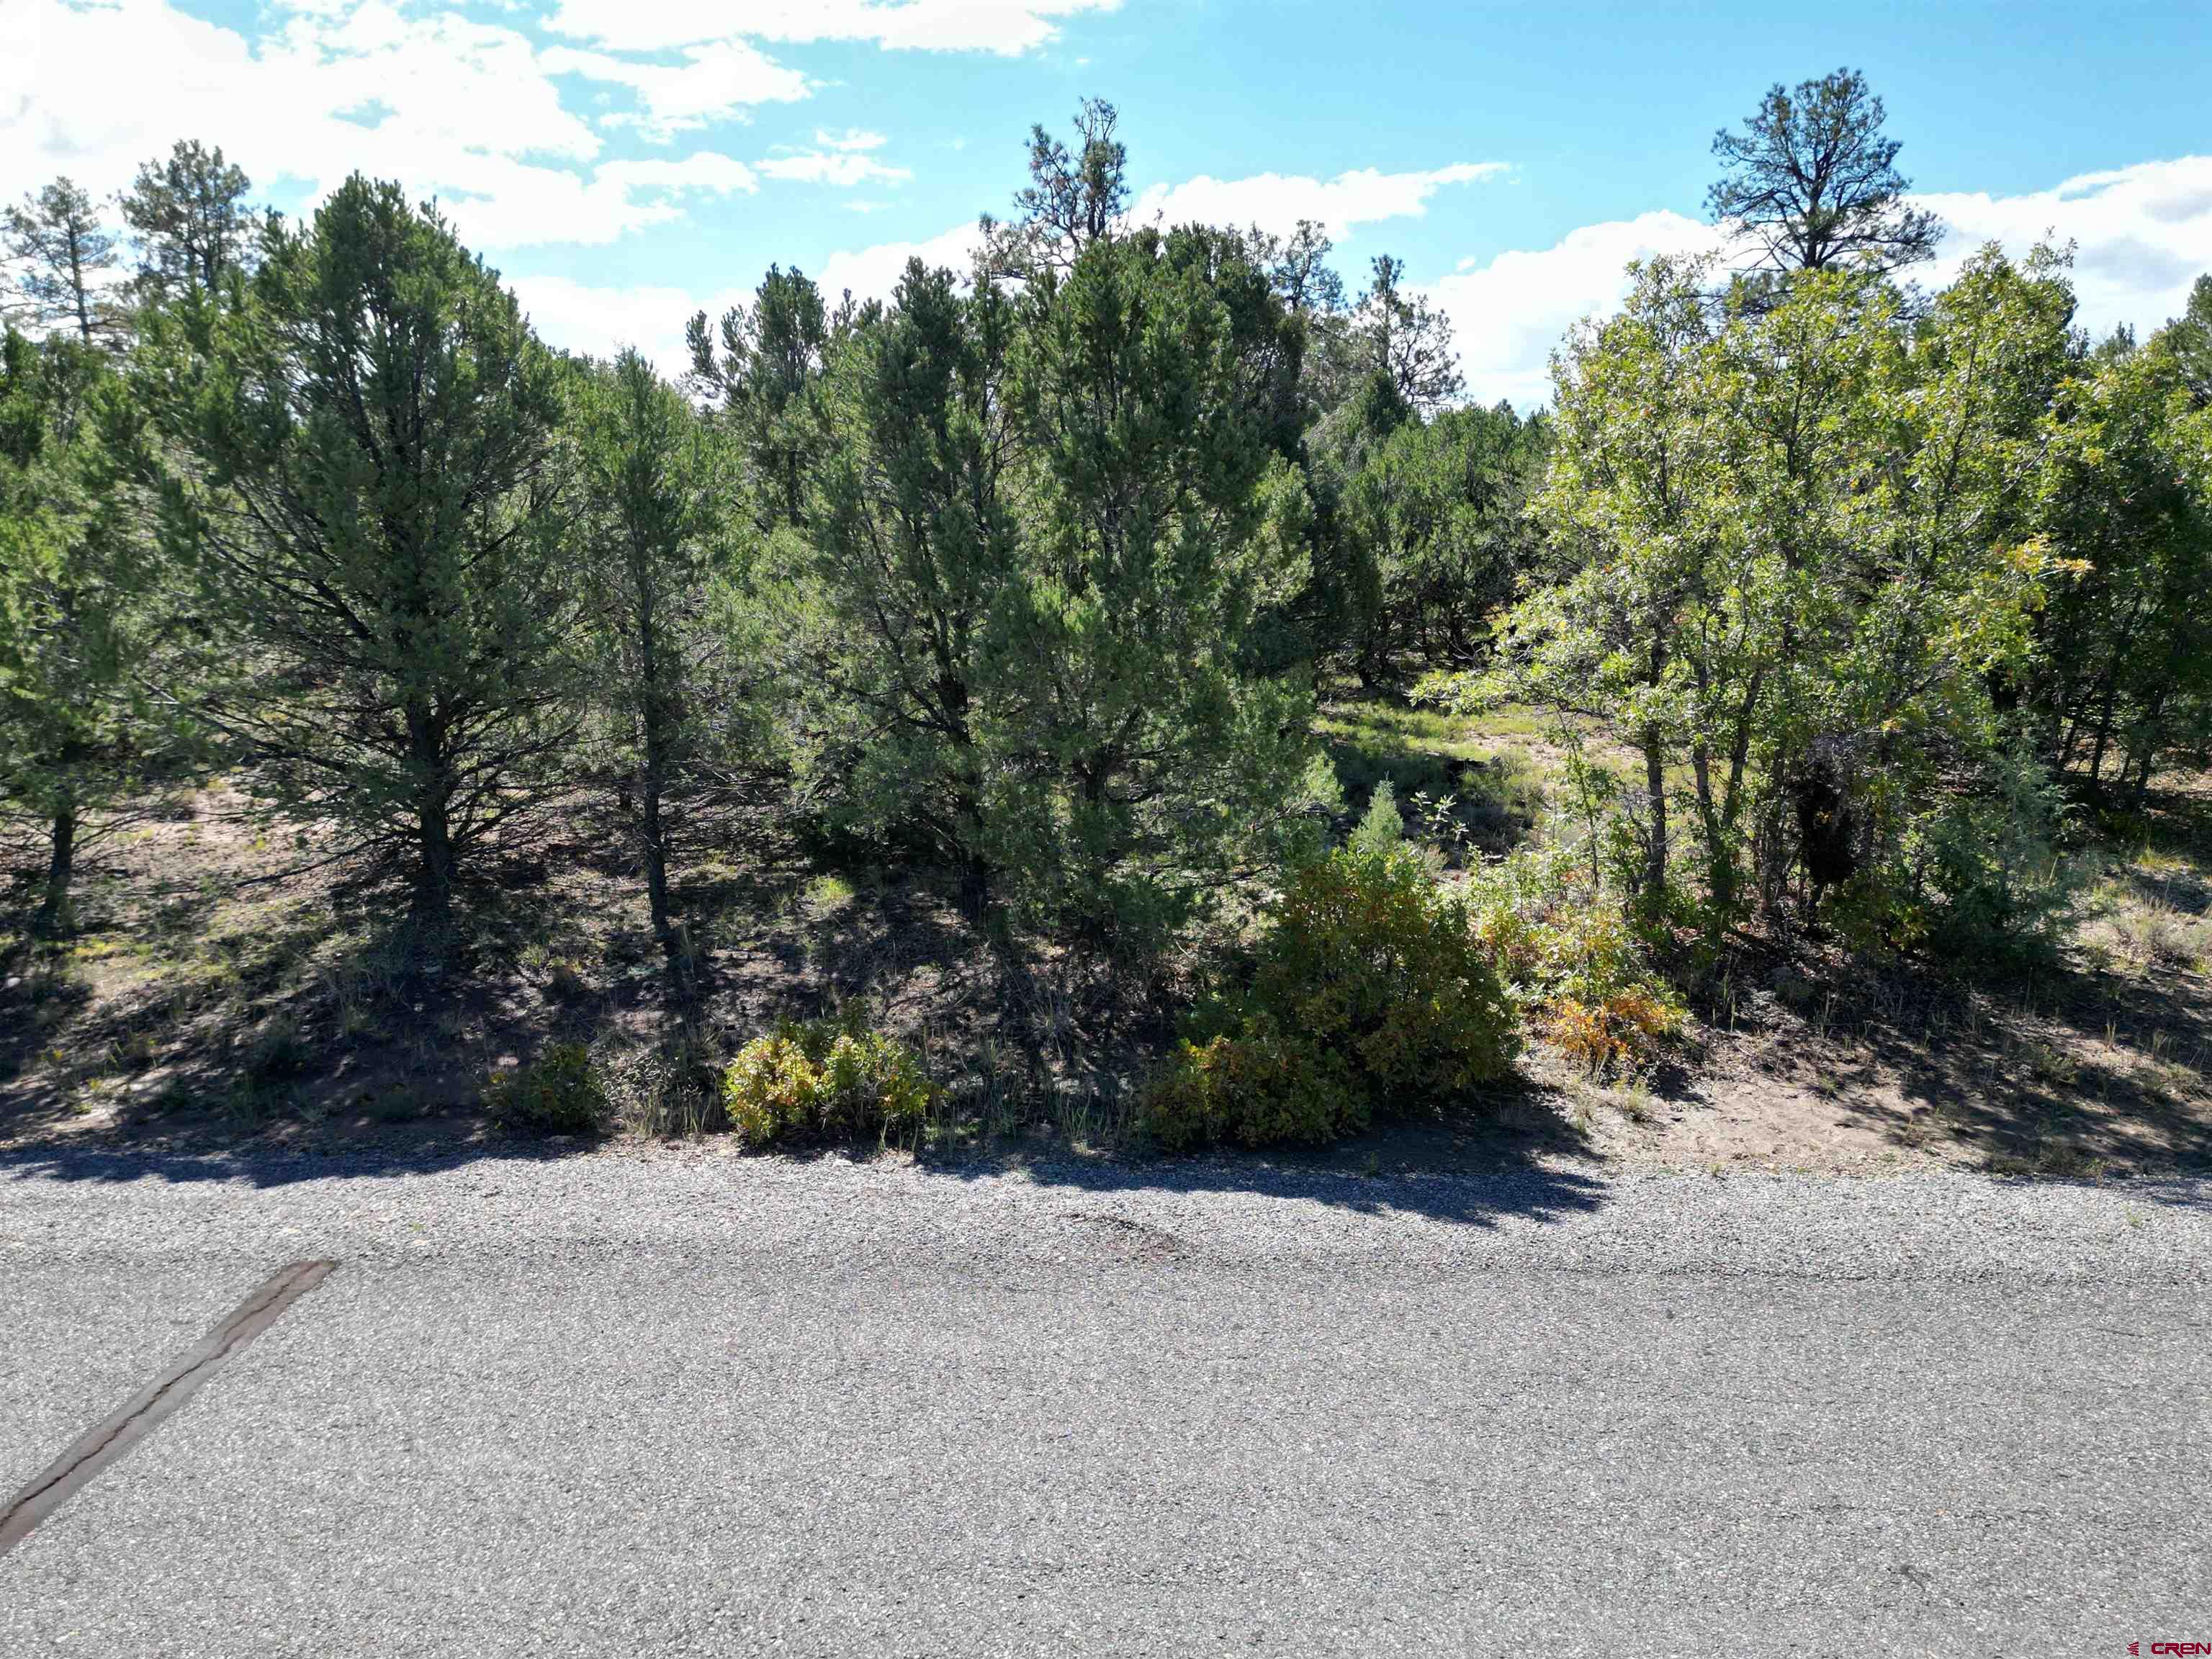 Escape to Divide Ranch & Club and enjoy all that this community has to offer with this amazing 2.002 acreage lot overlooking the 14th fairway of the Divide 18 hole Award Winning Golf Course with 8,600 square foot clubhouse. Design and build your Colorado mountain retreat on this beautiful lot with Ponderosa Pines and views of the surrounding mountain ranges. Located less than 8 miles to historic Ridgway known as the "Gateway to the San Juans" and where the original "True Grit" and "How the West was Won" movies were filmed. Other nearby attractions are Ouray which is known as the "Switzerland of America" and offers many hot springs for people to enjoy is just 10 miles away. The popular town of Telluride is an easy commute, a little over 30 miles away to enjoy world class skiing and summers full of cultural events and outdoor activities. Montrose Regional Airport is just 30 minutes away making it accessible to everyone. This is one of only a few developer serviced lots which includes paid water and sewer taps. A one time mandatory membership initiation fee of $15,000 for the Divide Ranch & Club is due at time of closing.